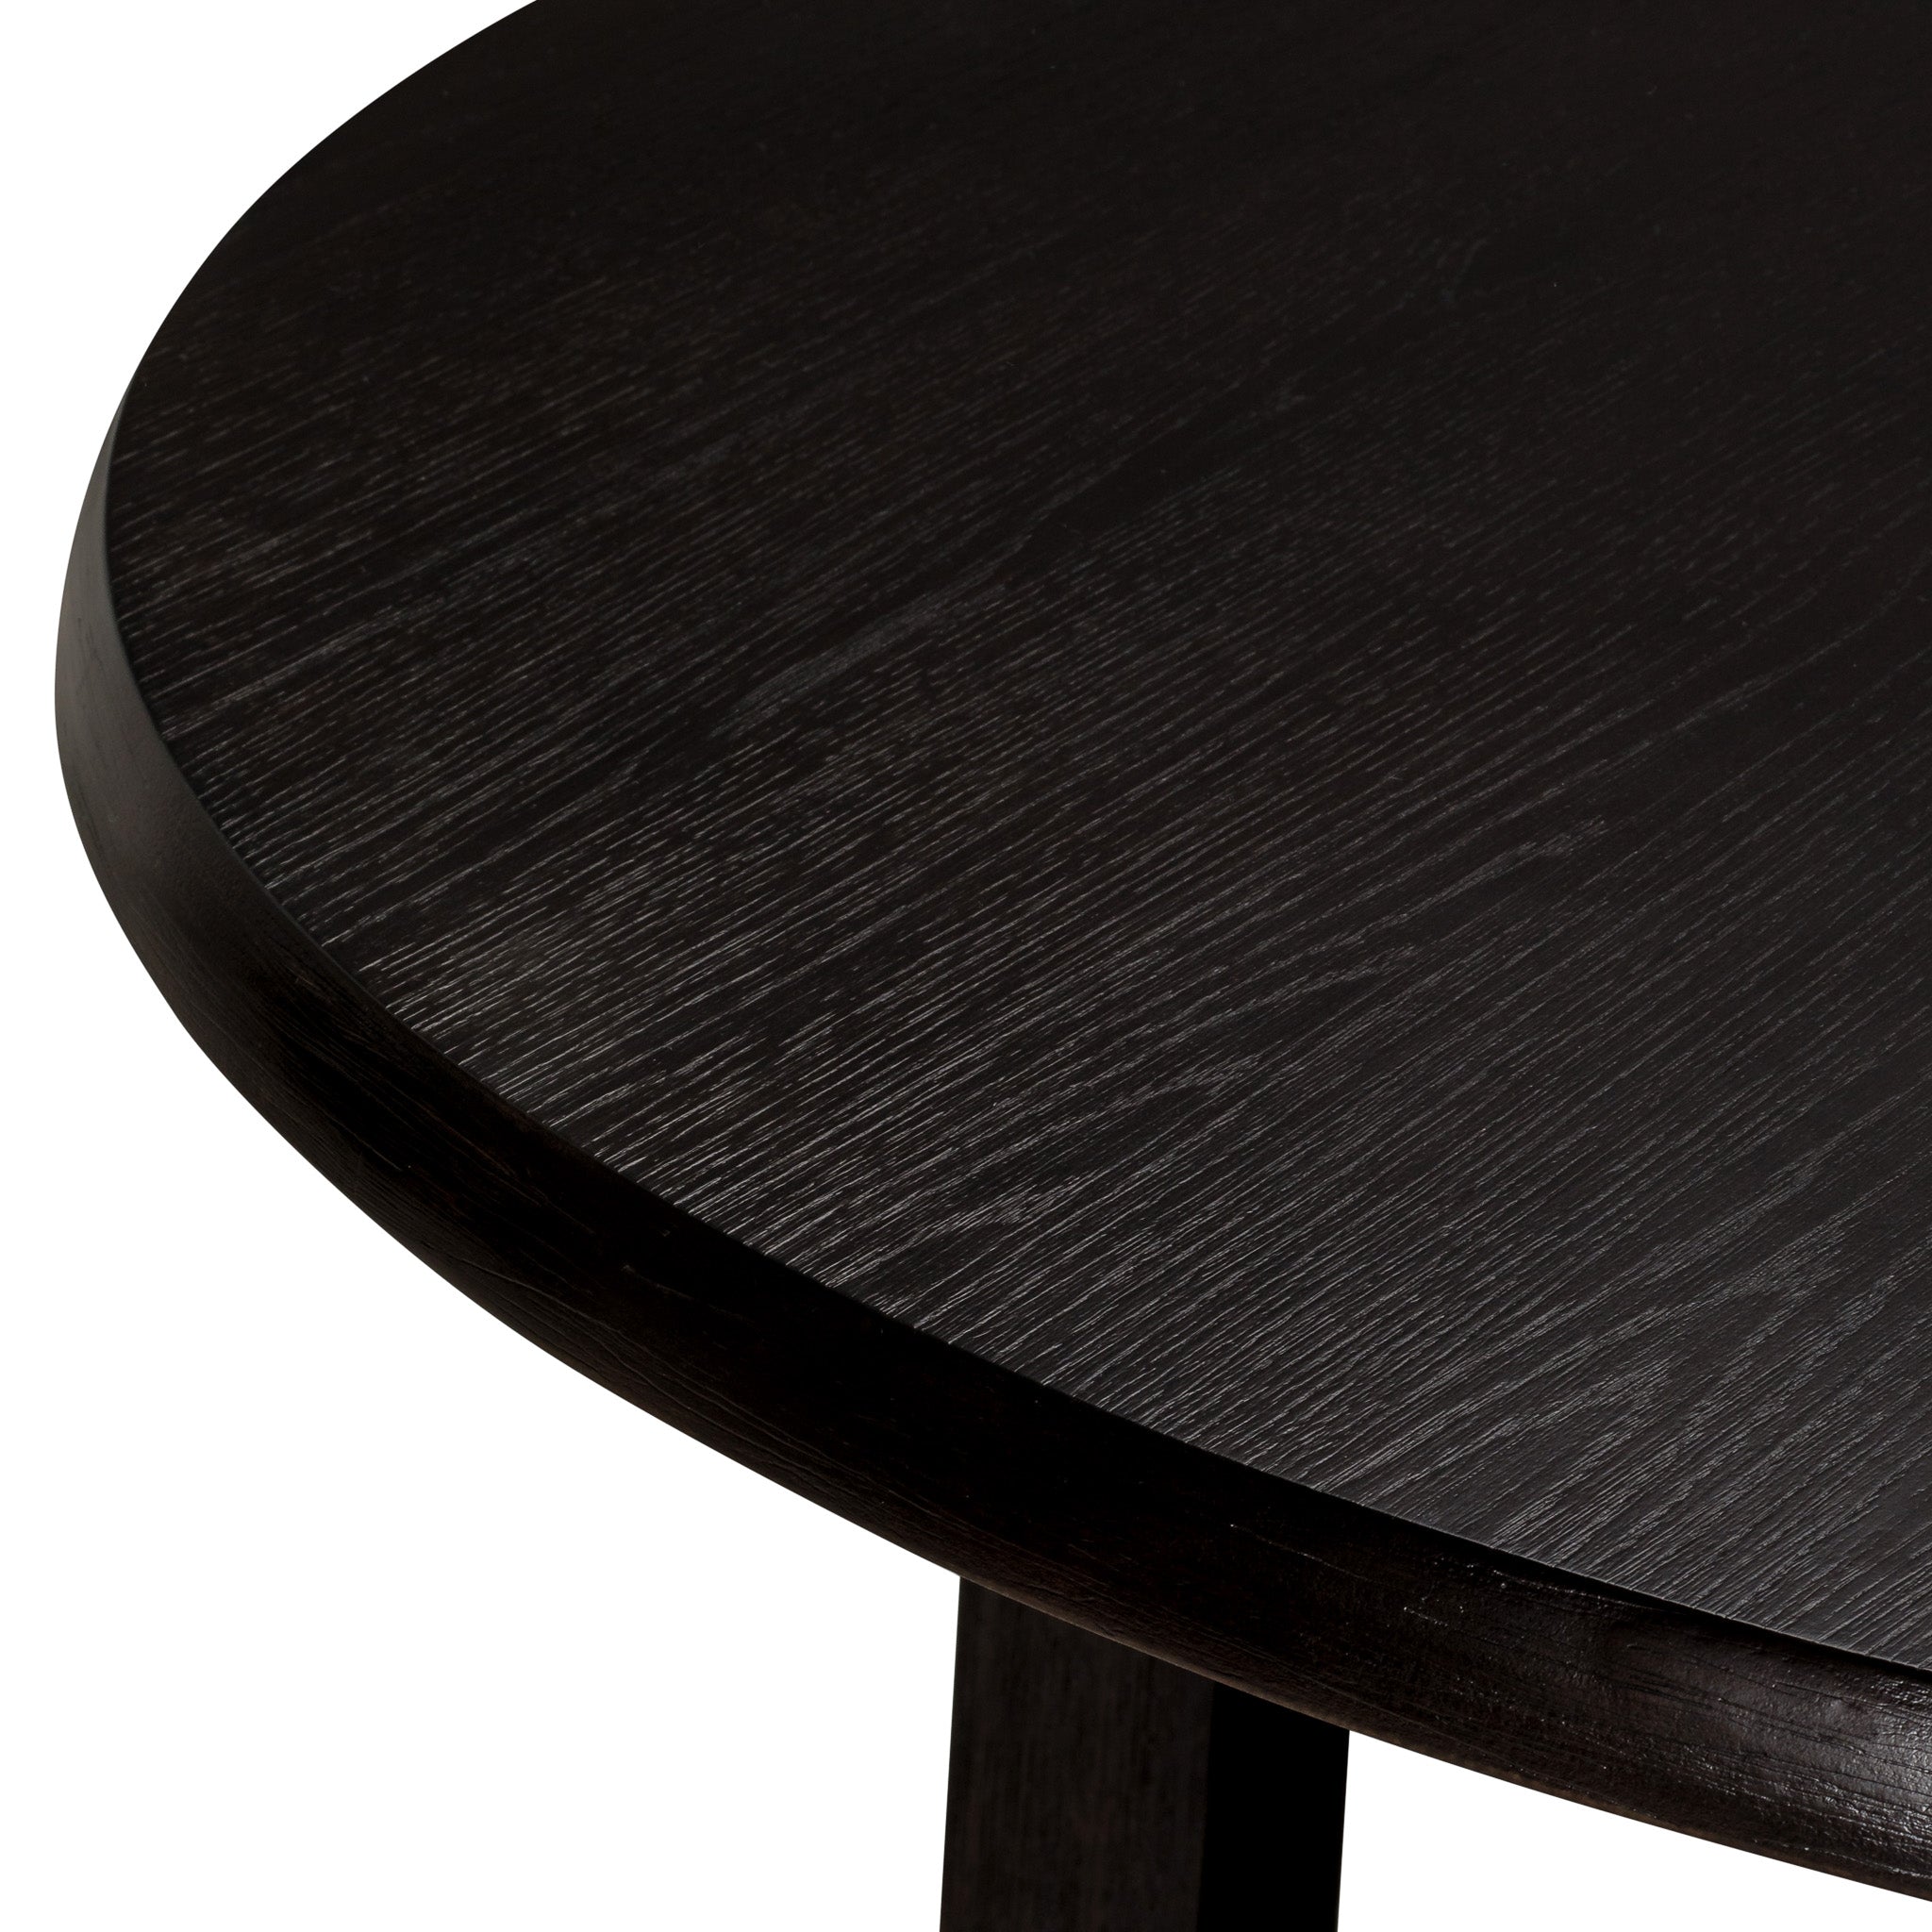 Sasha Organic Round Wooden Dining Table in Weathered Black Finish in Dining Furniture by Maven Lane